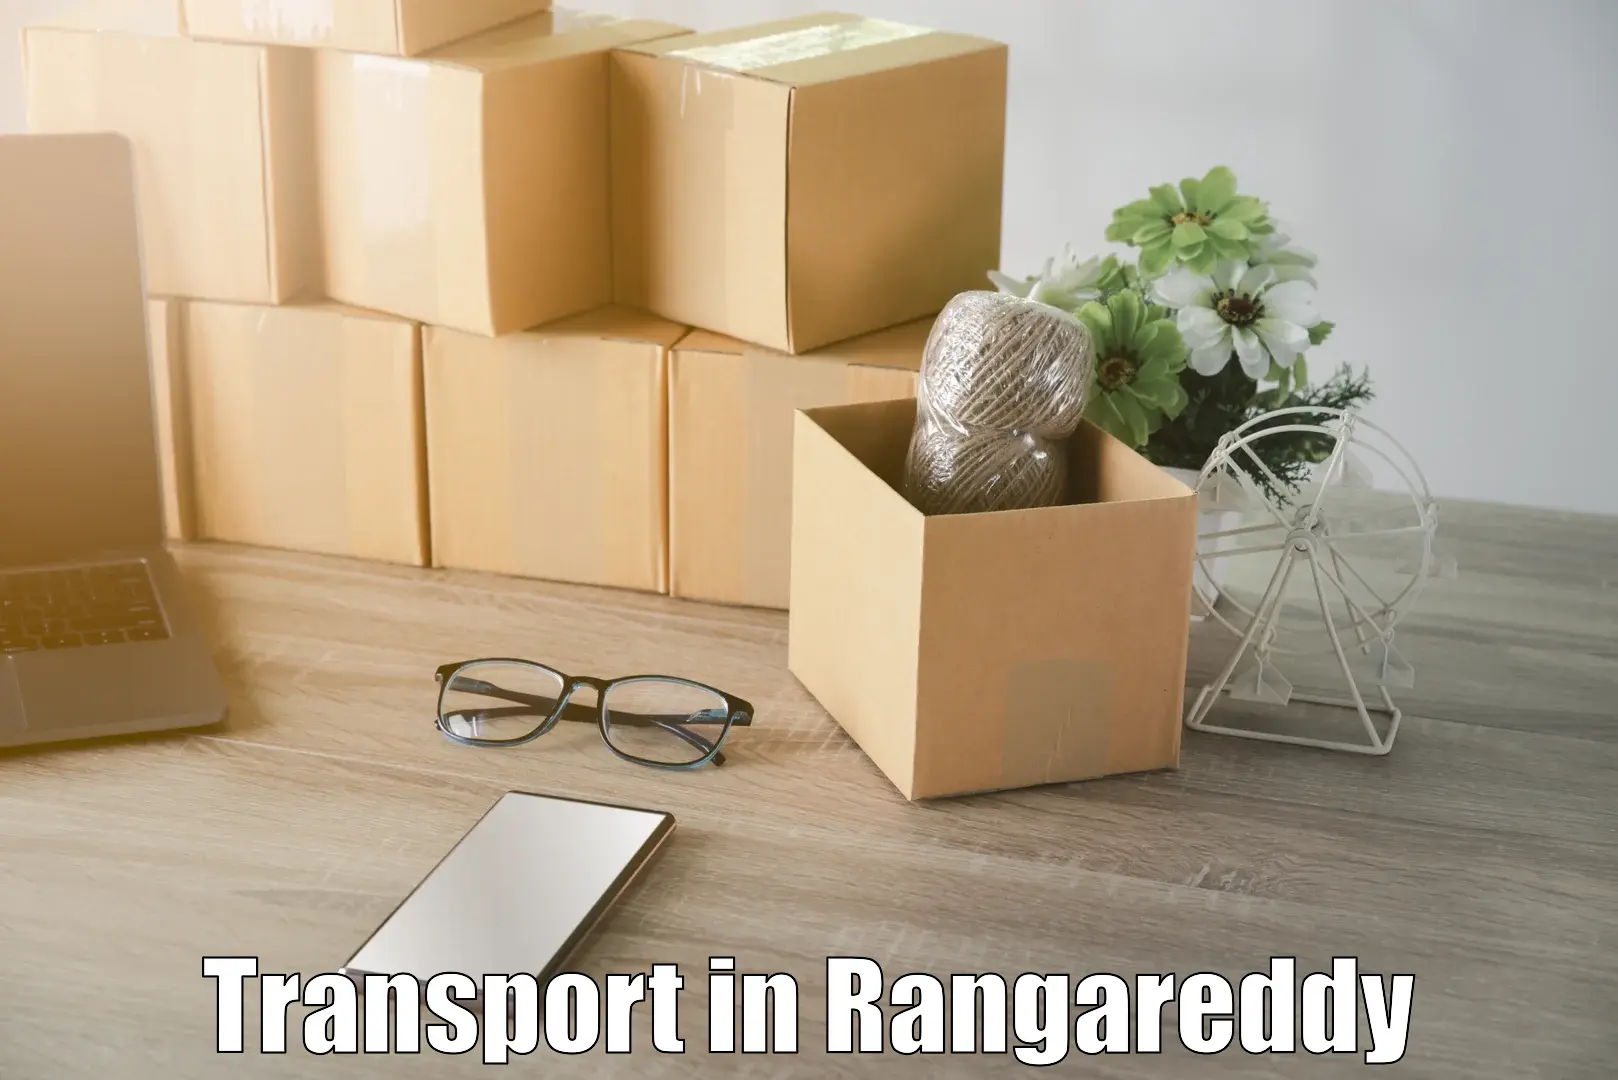 Road transport online services in Rangareddy